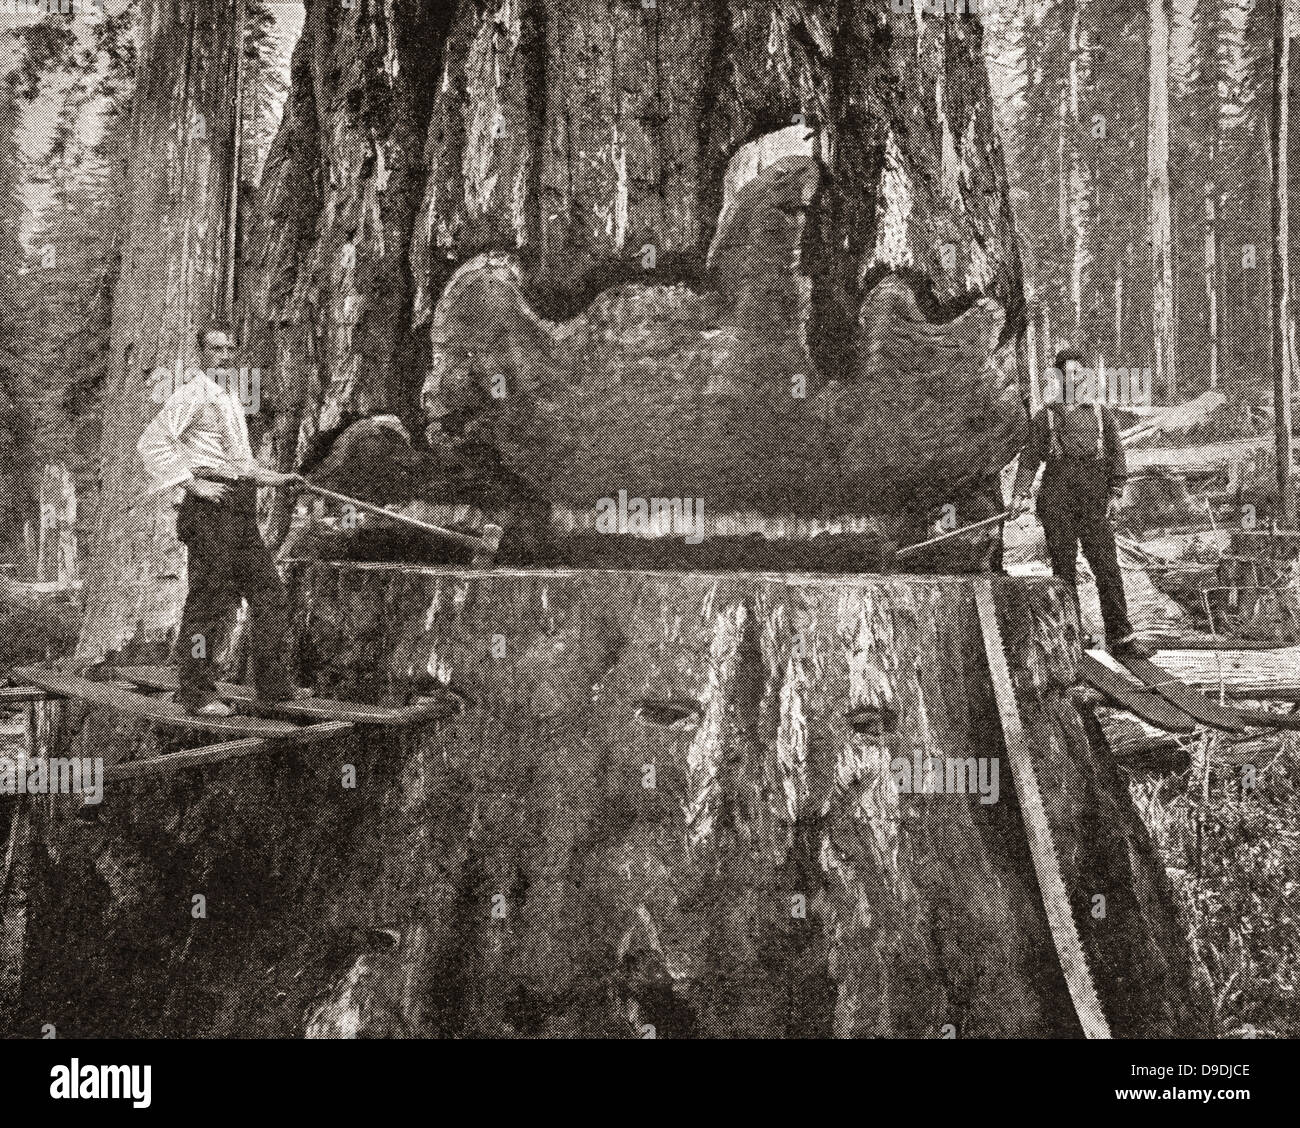 Cutting down a giant California Redwood tree in the late 19th century. Stock Photo